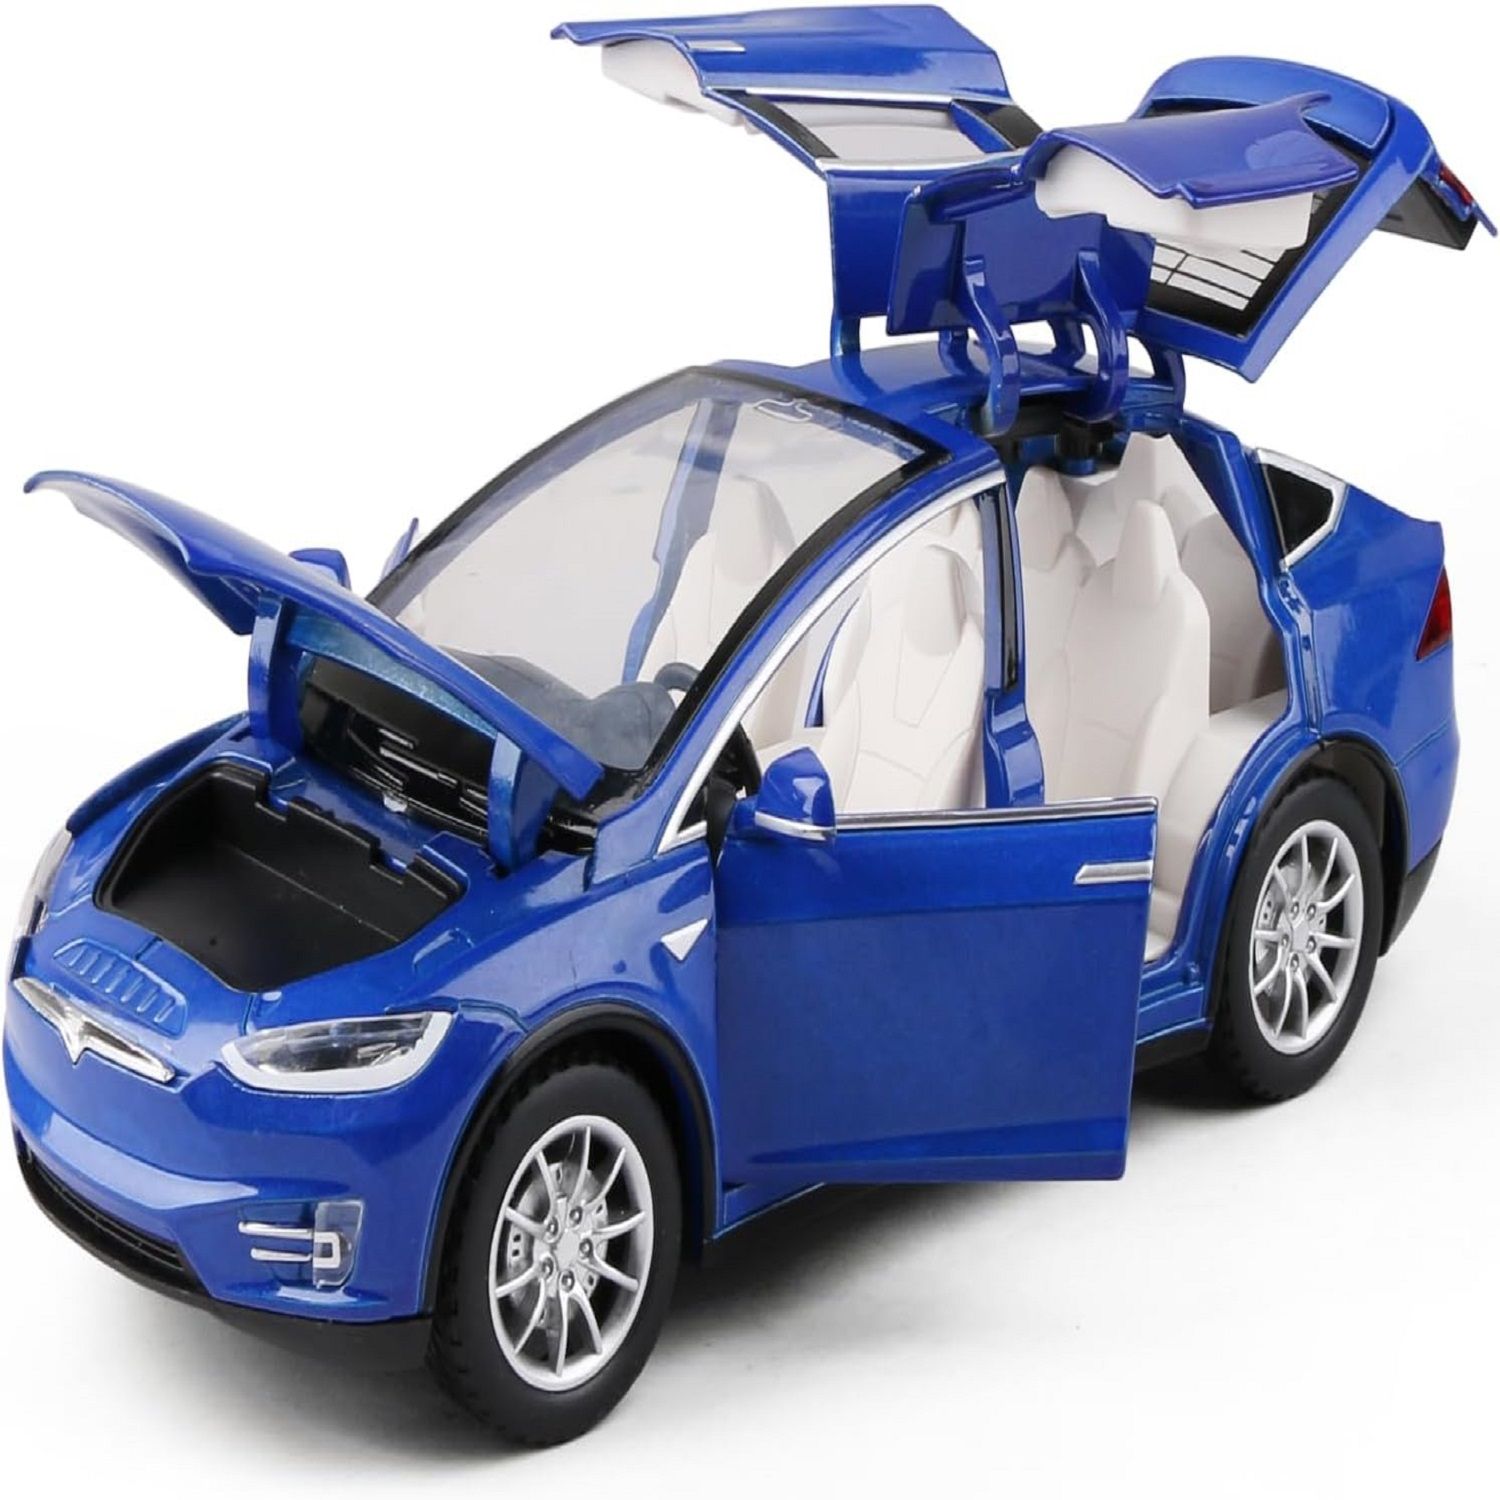 KTRS ENTERPRISE 1:24 Diecast Model Car for Tesla Model X s Complete with Lights and Simulation of Sound. This Decorative Alloy Mini Vehicle is a Unique Gift for Your Loves or Young